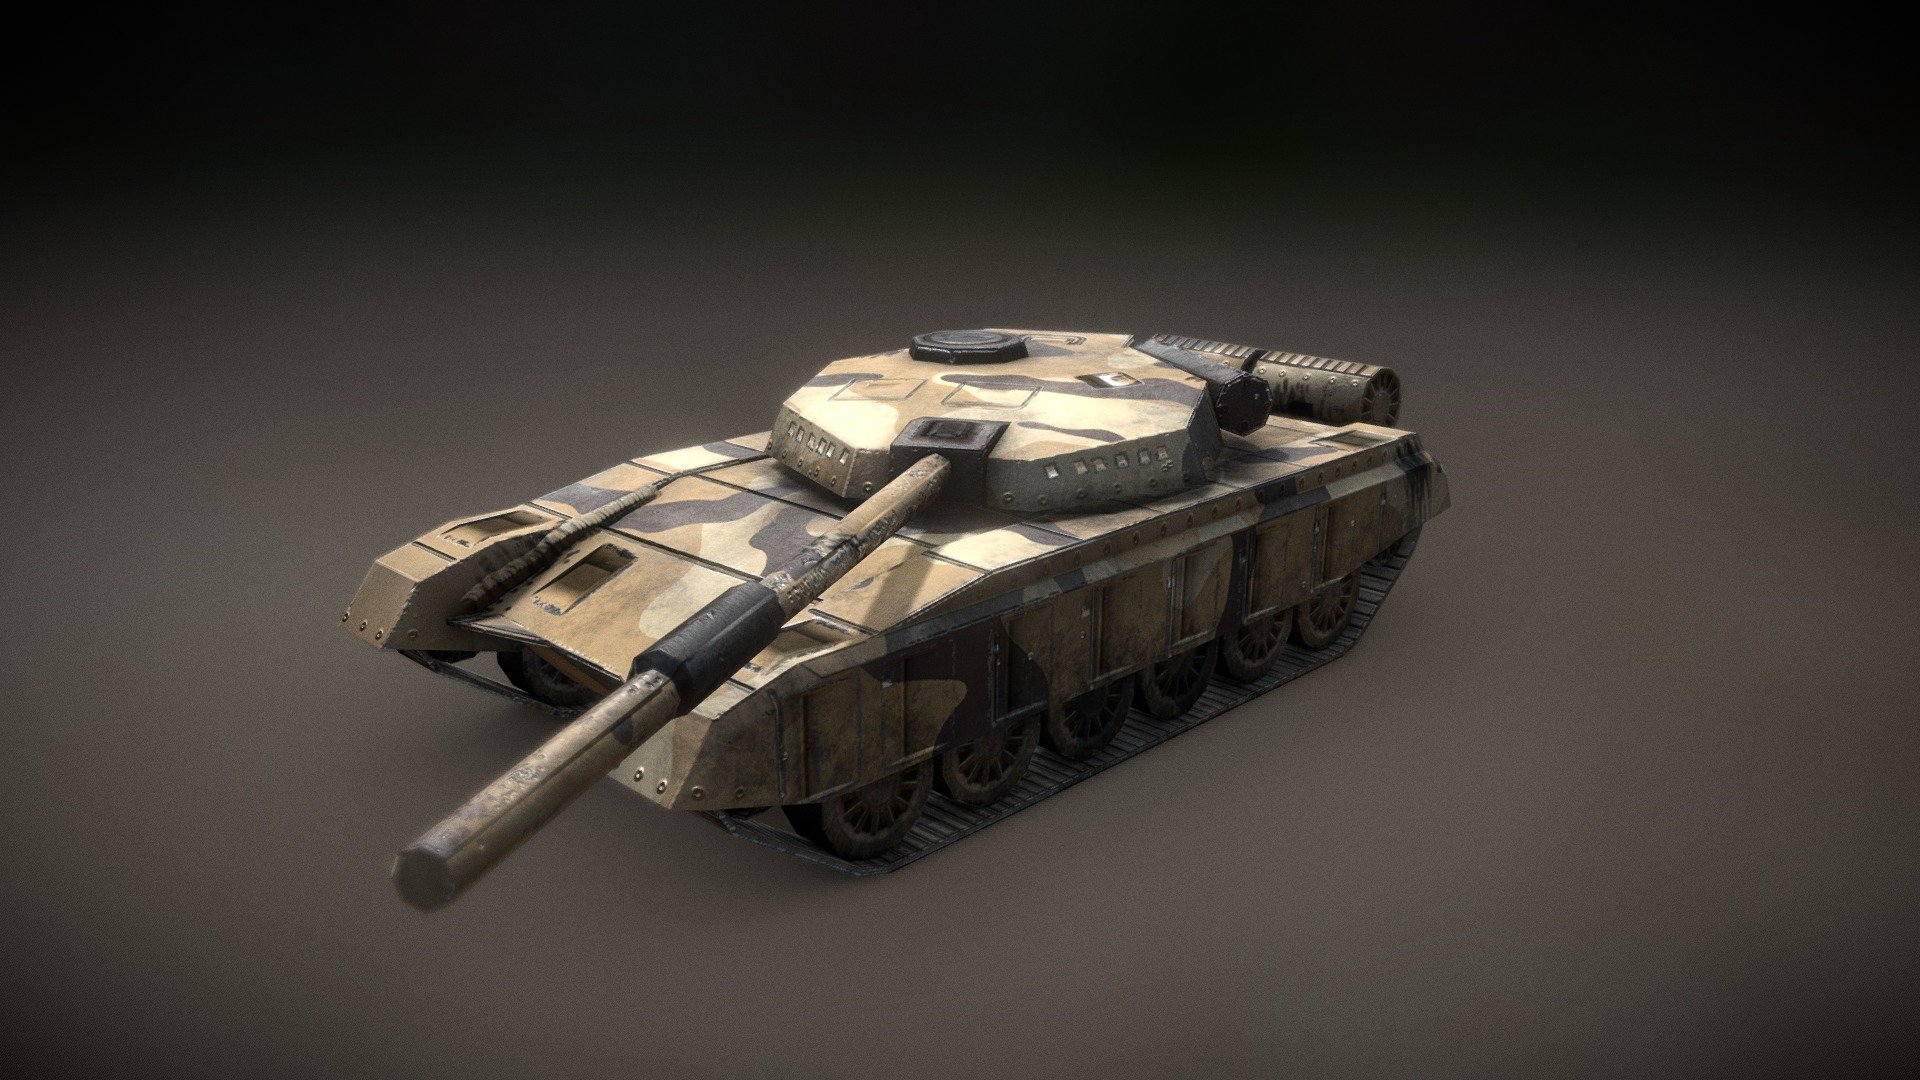 Simple low poly model based on a T-72 tank.

Turret and barrel are rigged and the model is game ready with pbr textures.

Great for background prop - Low Poly T-72 Tank - Game Ready - Download Free 3D model by Mr. The Rich (@MrTheRich) 3d model